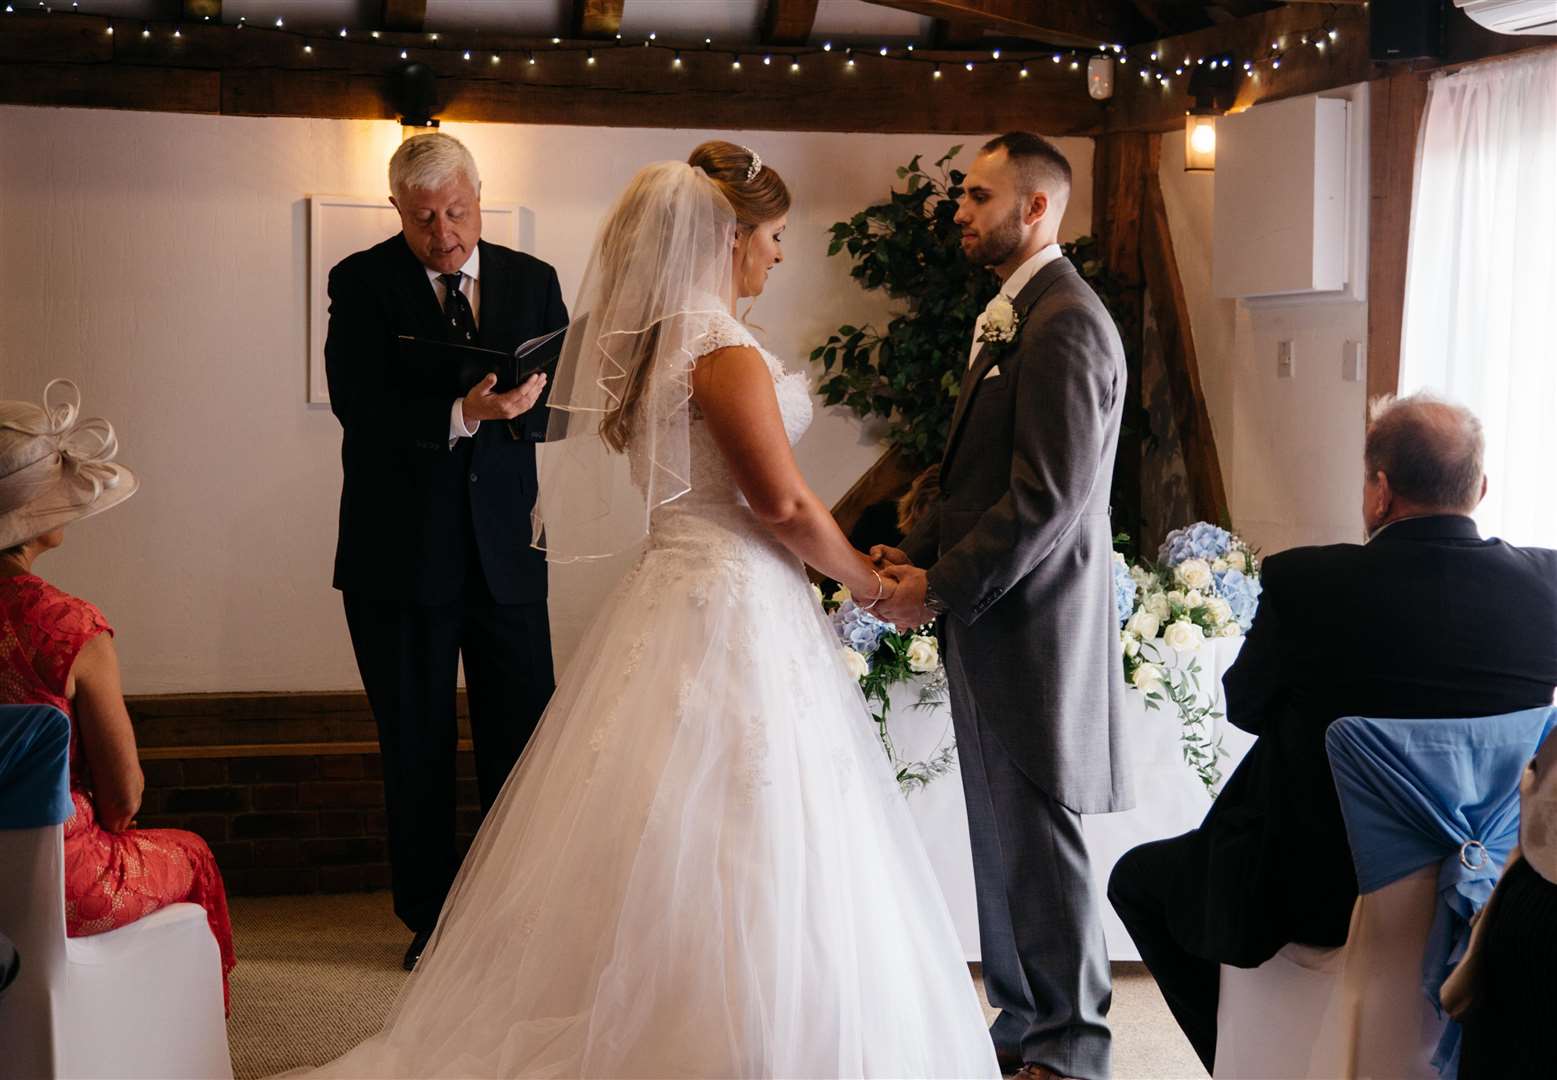 Twinkling fairy lights, lit up the room as Holly and Stan said their I dos